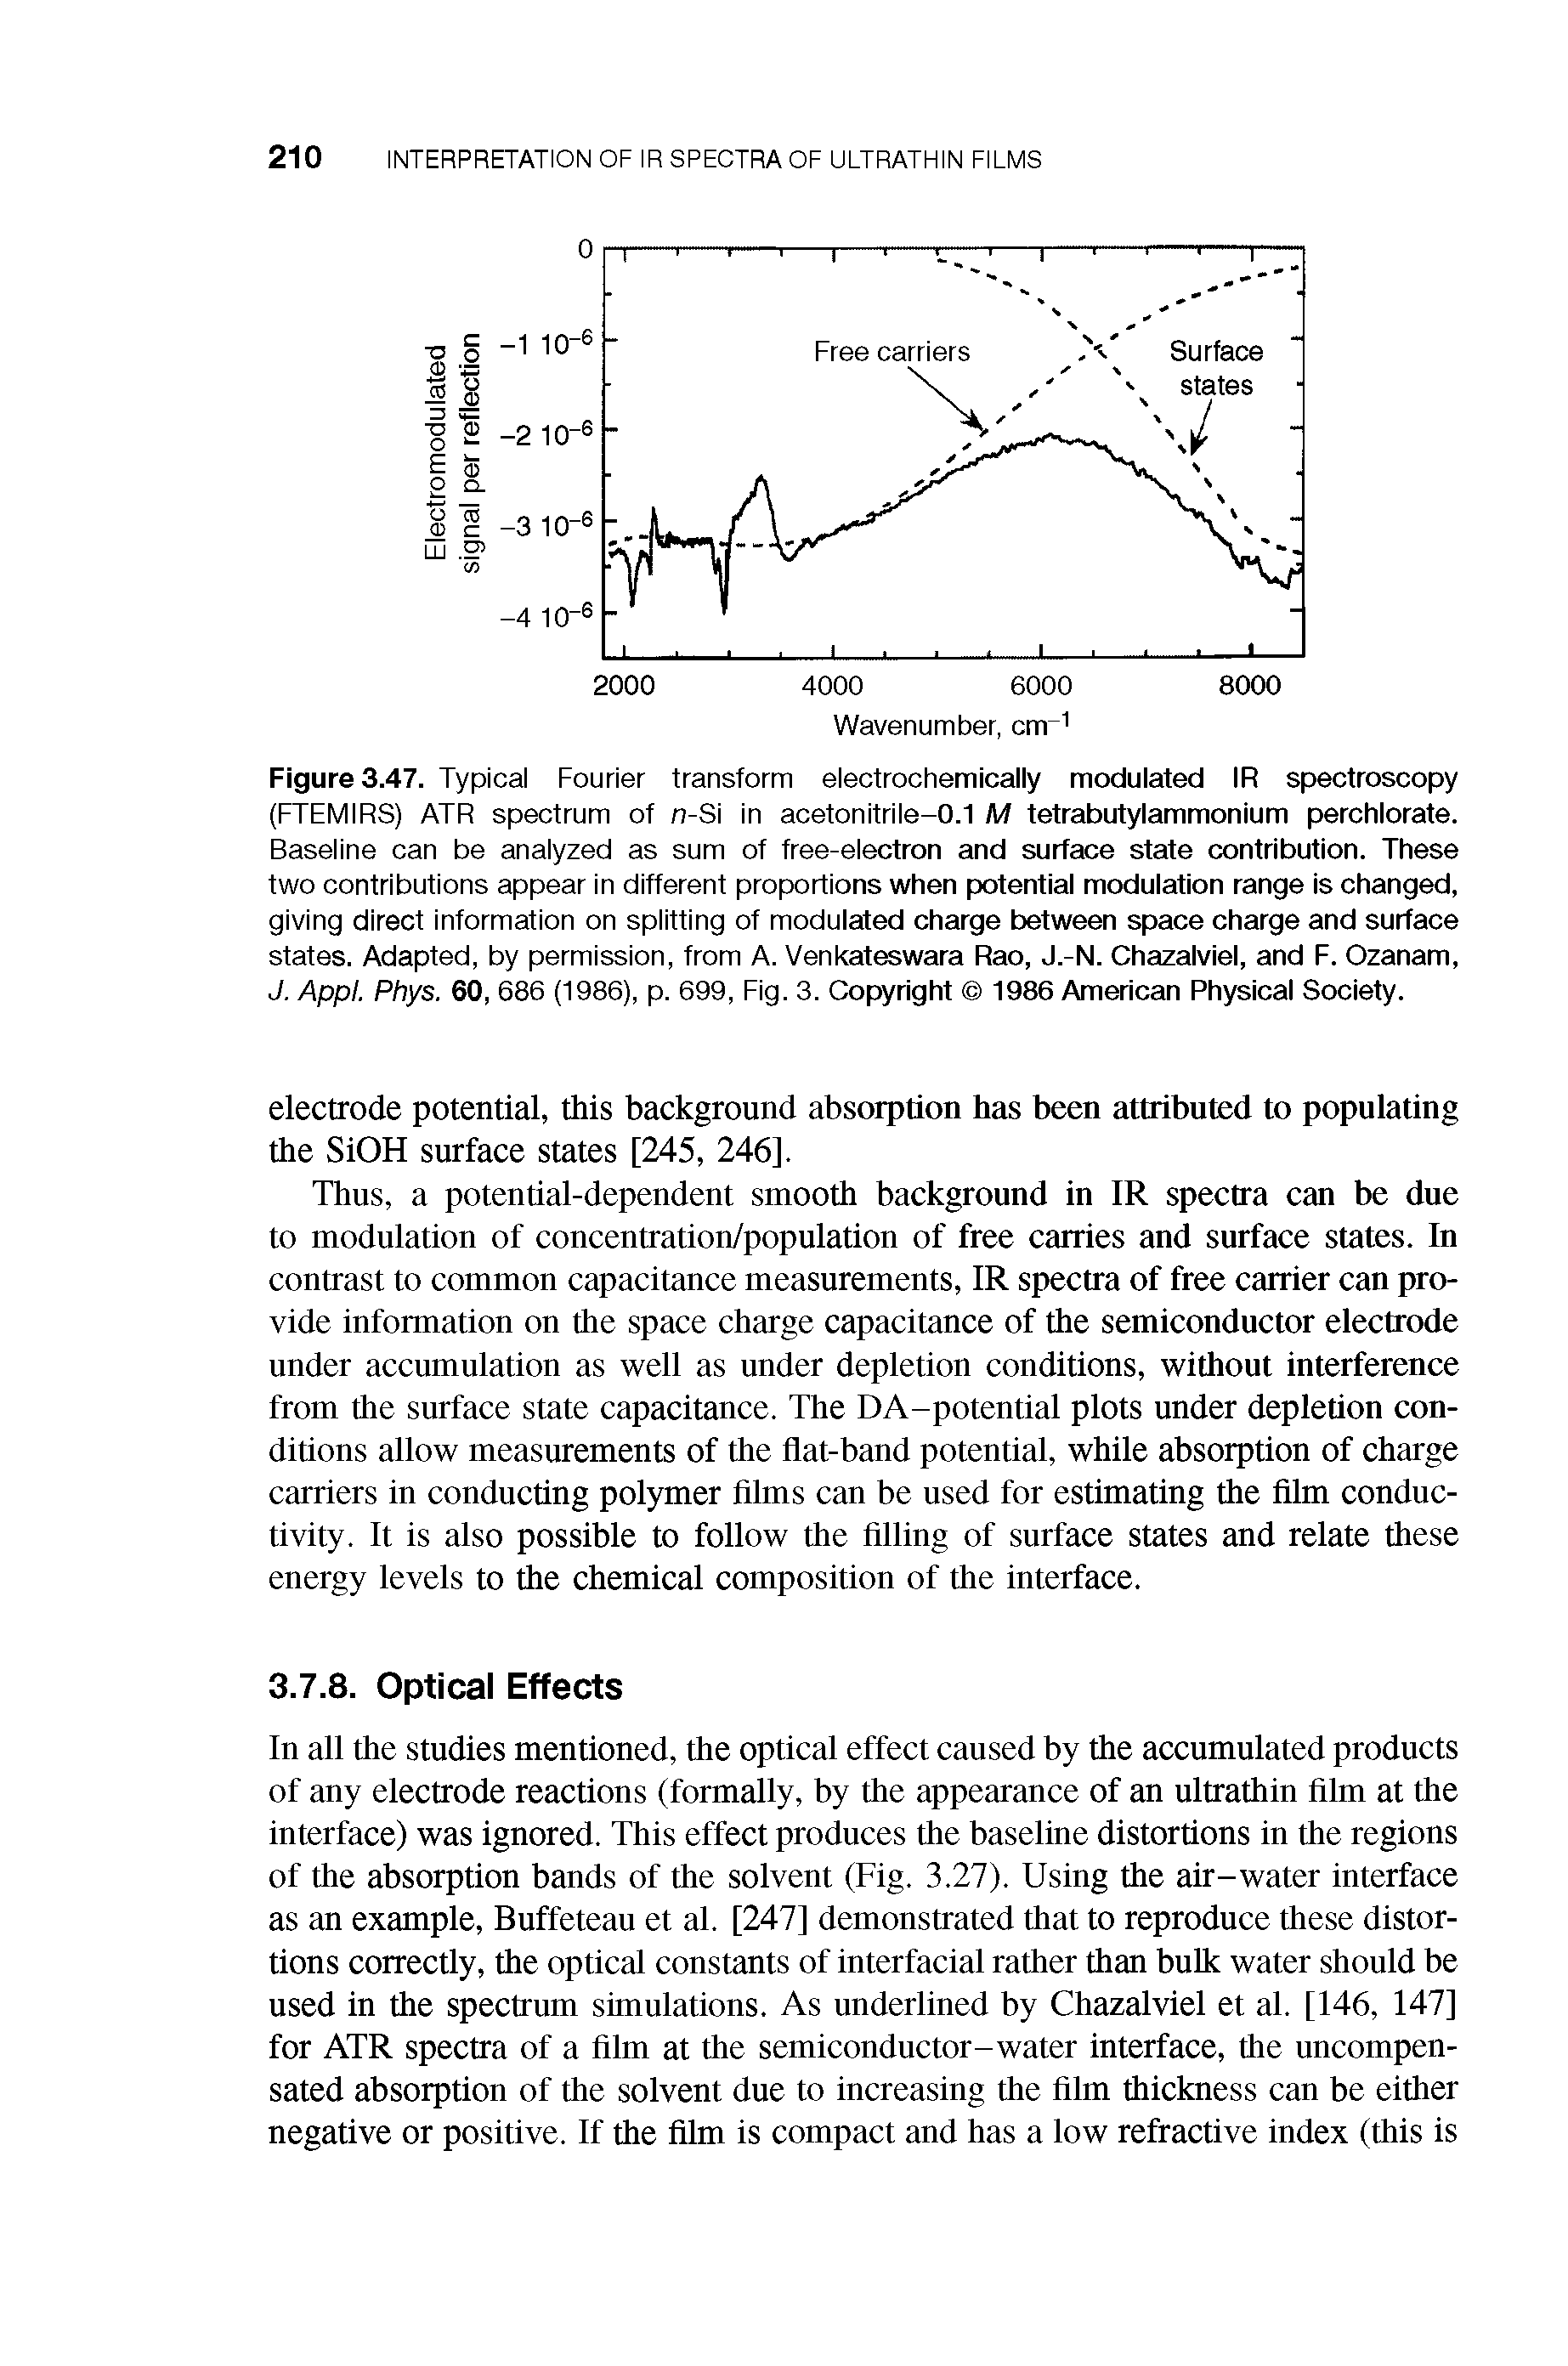 Figure 3.47. Typical Fourier transform electrochemically modulated IR spectroscopy (FTEMIRS) ATR spectrum of n-Si in acetonitrile-0.1 M tetrabutylammonium perchlorate. Baseline can be analyzed as sum of free-electron and surface state contribution. These two contributions appear in different proportions when potential modulation range is changed, giving direct information on splitting of modulated charge between space charge and surface states. Adapted, by permission, from A. Venkateswara Rao, J.-N. Chazalviel, and F. Ozanam, J. Appl. Phys. 60, 686 (1986), p. 699, Fig. 3. Copyright 1986 American Physical Society.